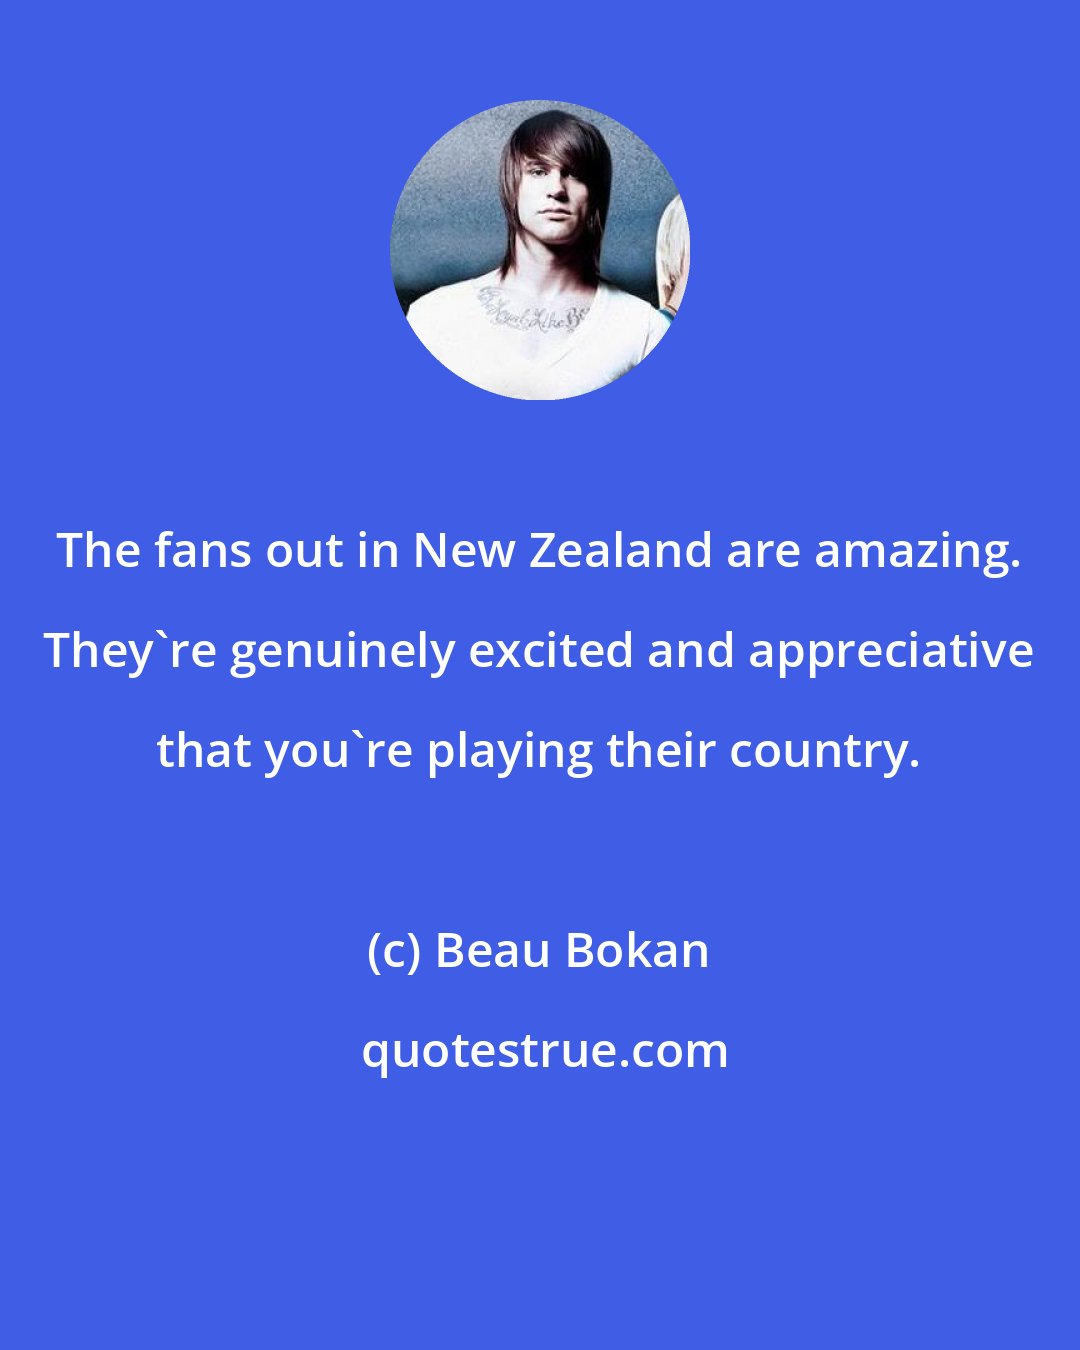 Beau Bokan: The fans out in New Zealand are amazing. They're genuinely excited and appreciative that you're playing their country.